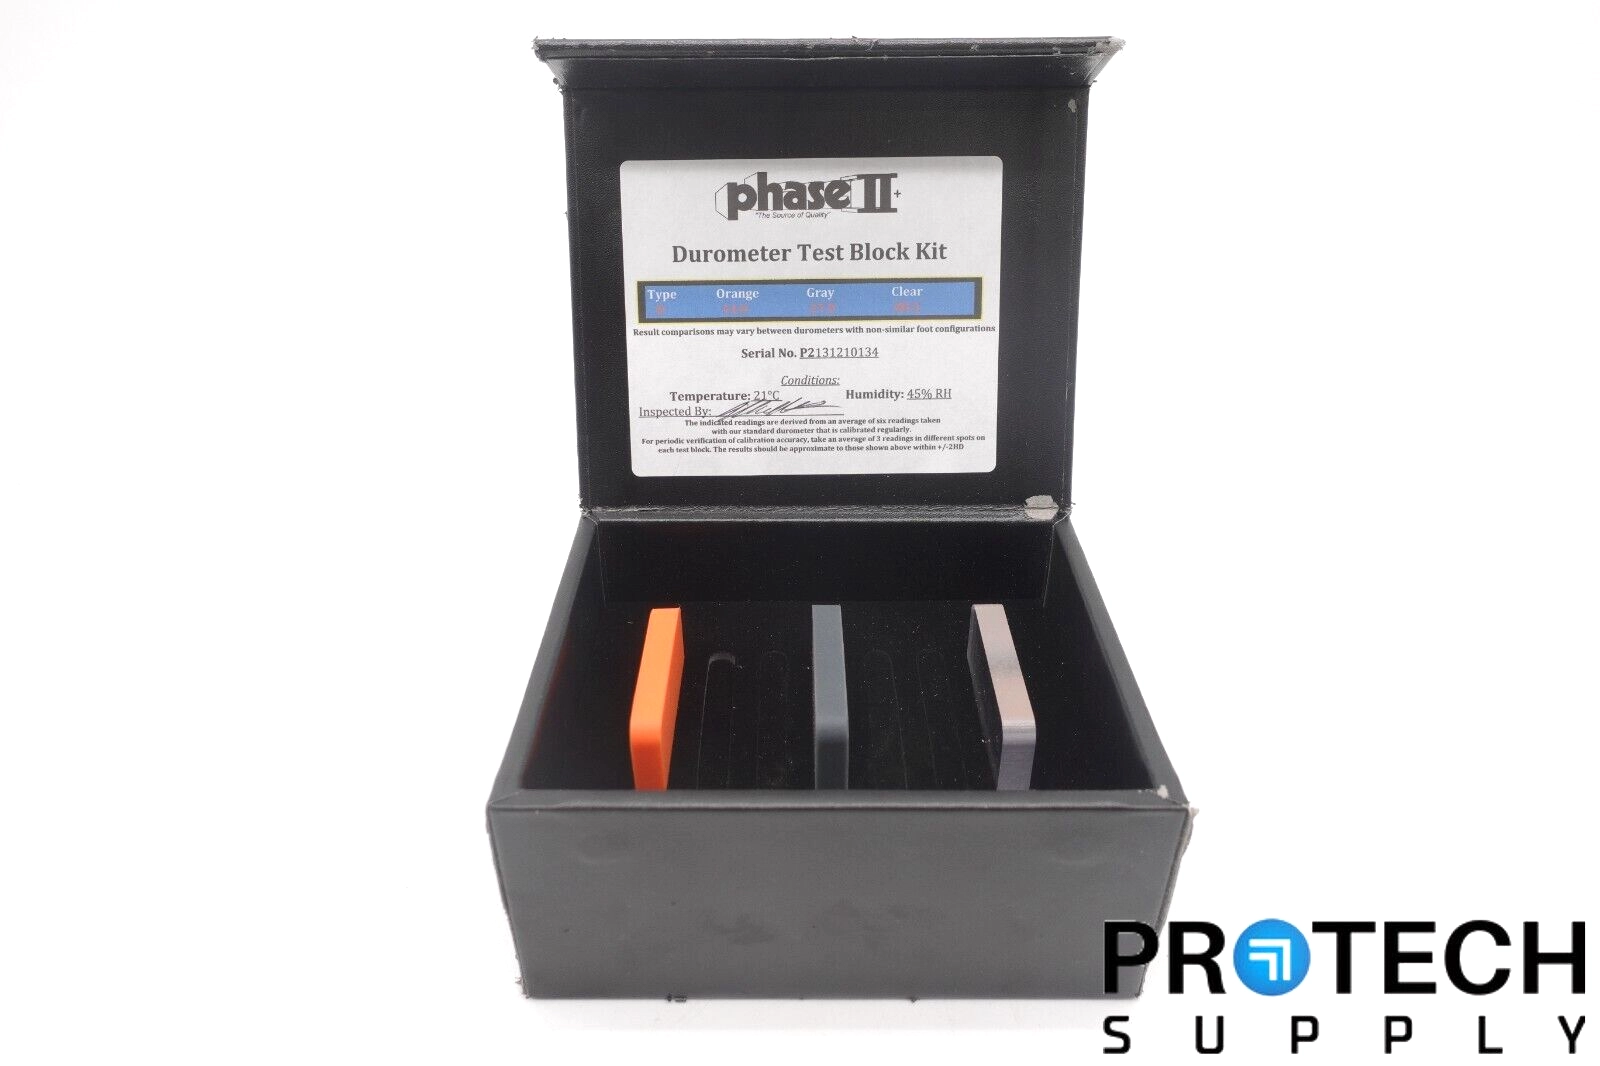 Phase II PHT975-20 3pc Durometer Shore "D" Test Bl